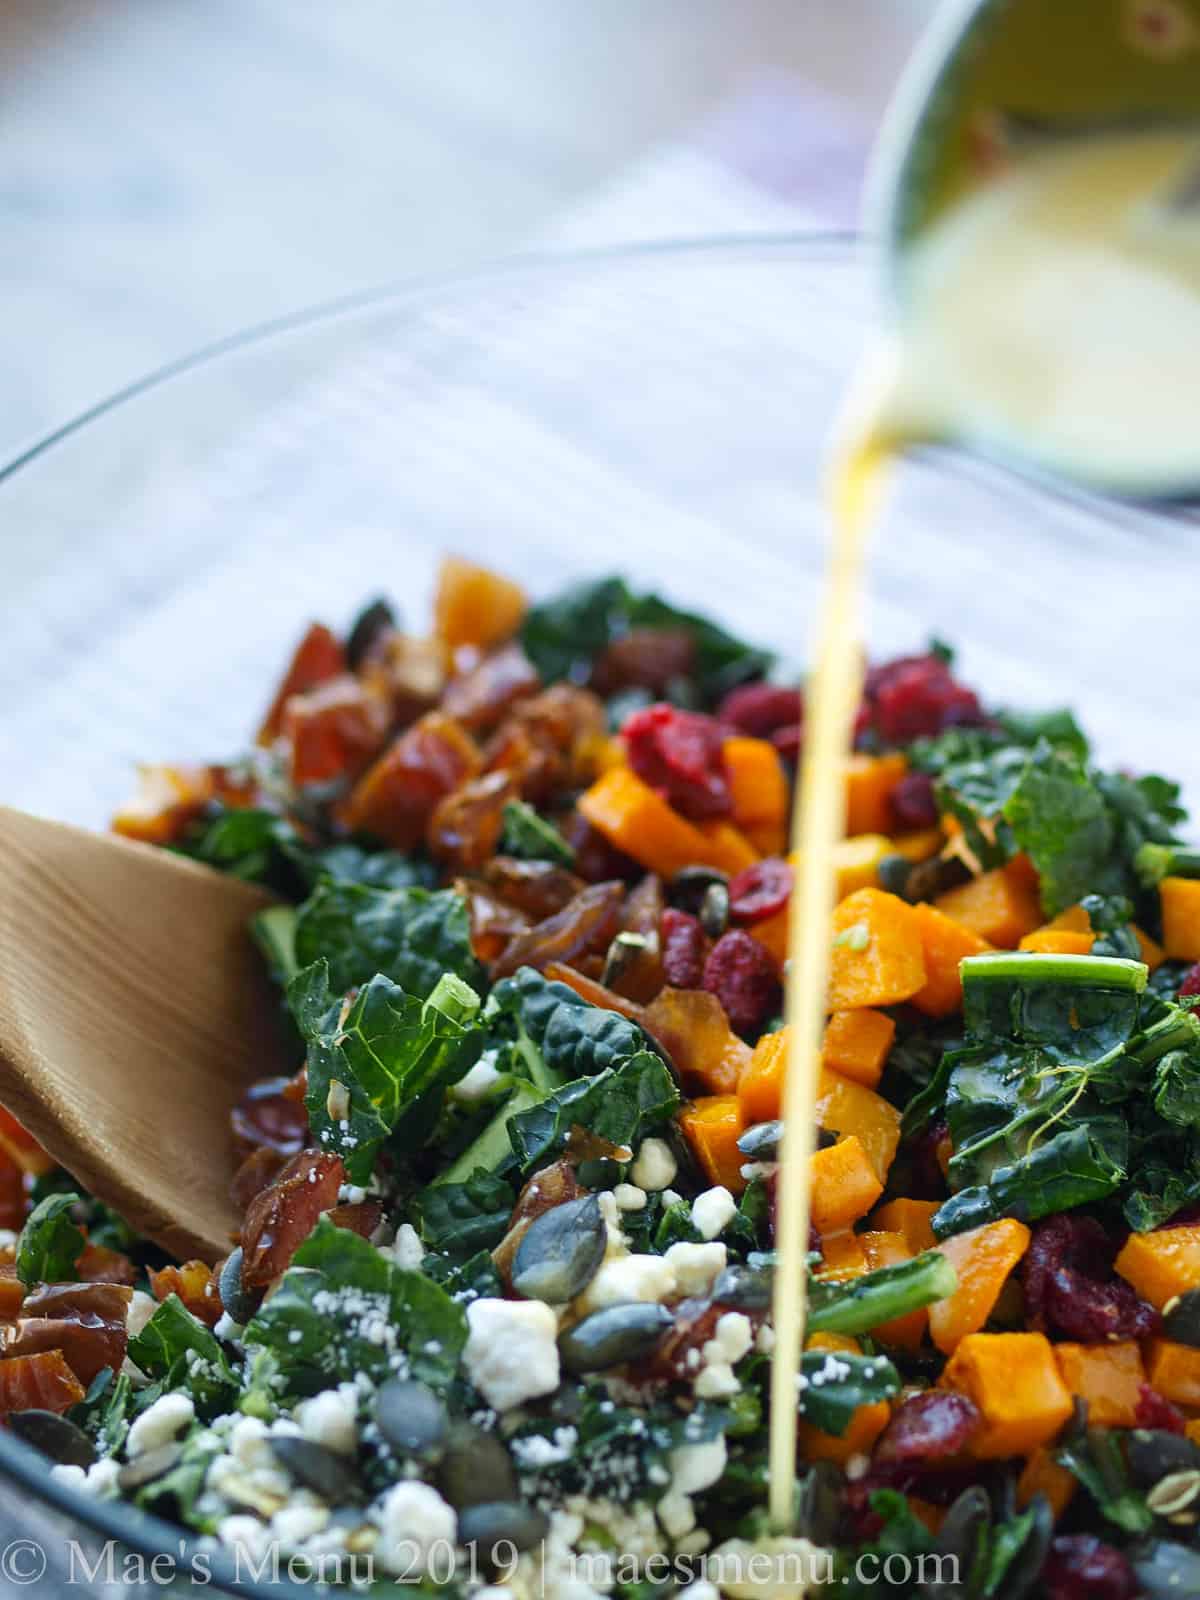 A bowl of Holiday lacinato kale salad with citrus agave dressing drizzling over.